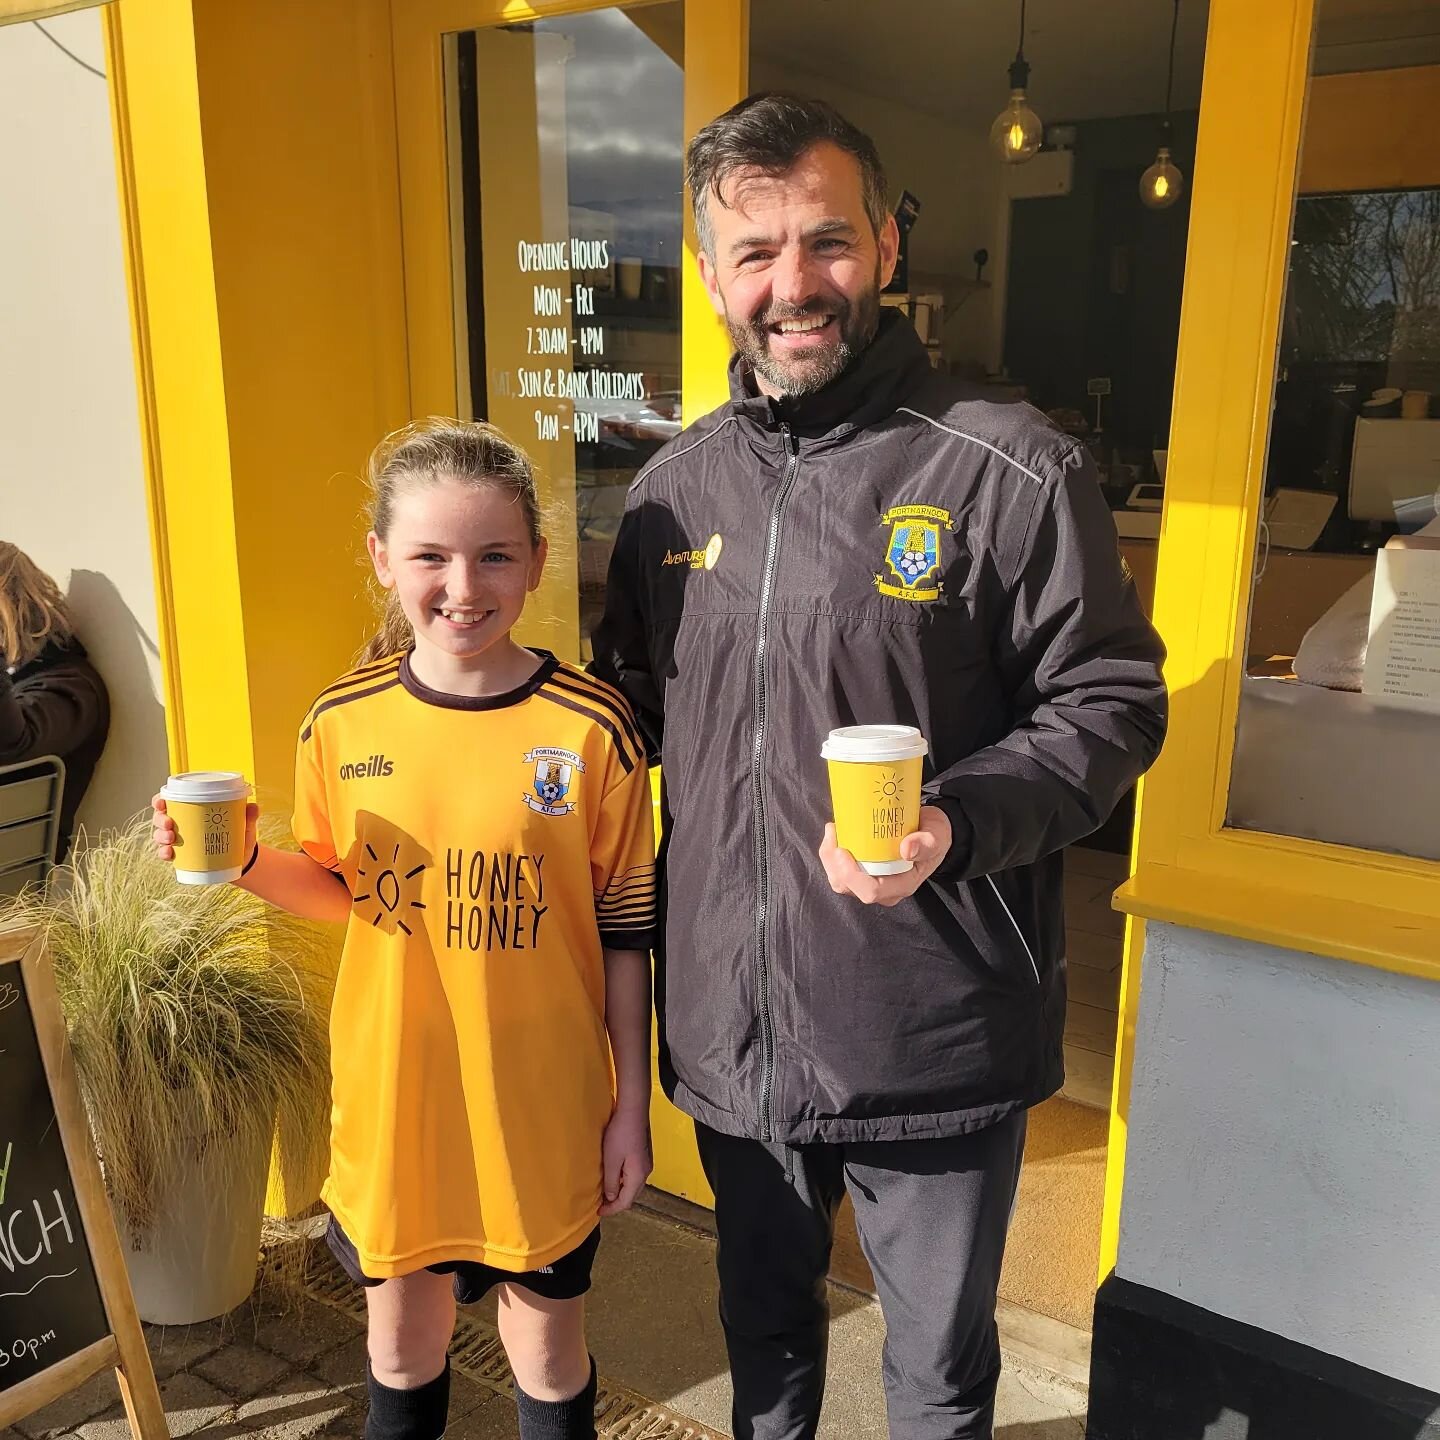 Well done to the @portmarnockafcgirls under 12's soccer team! 👏👏👏

They won all of their games today and are all just beaming in their new jerseys ☀️😍

We are super happy and excited to be sponsoring them this year...it's perfect match! Wishing t